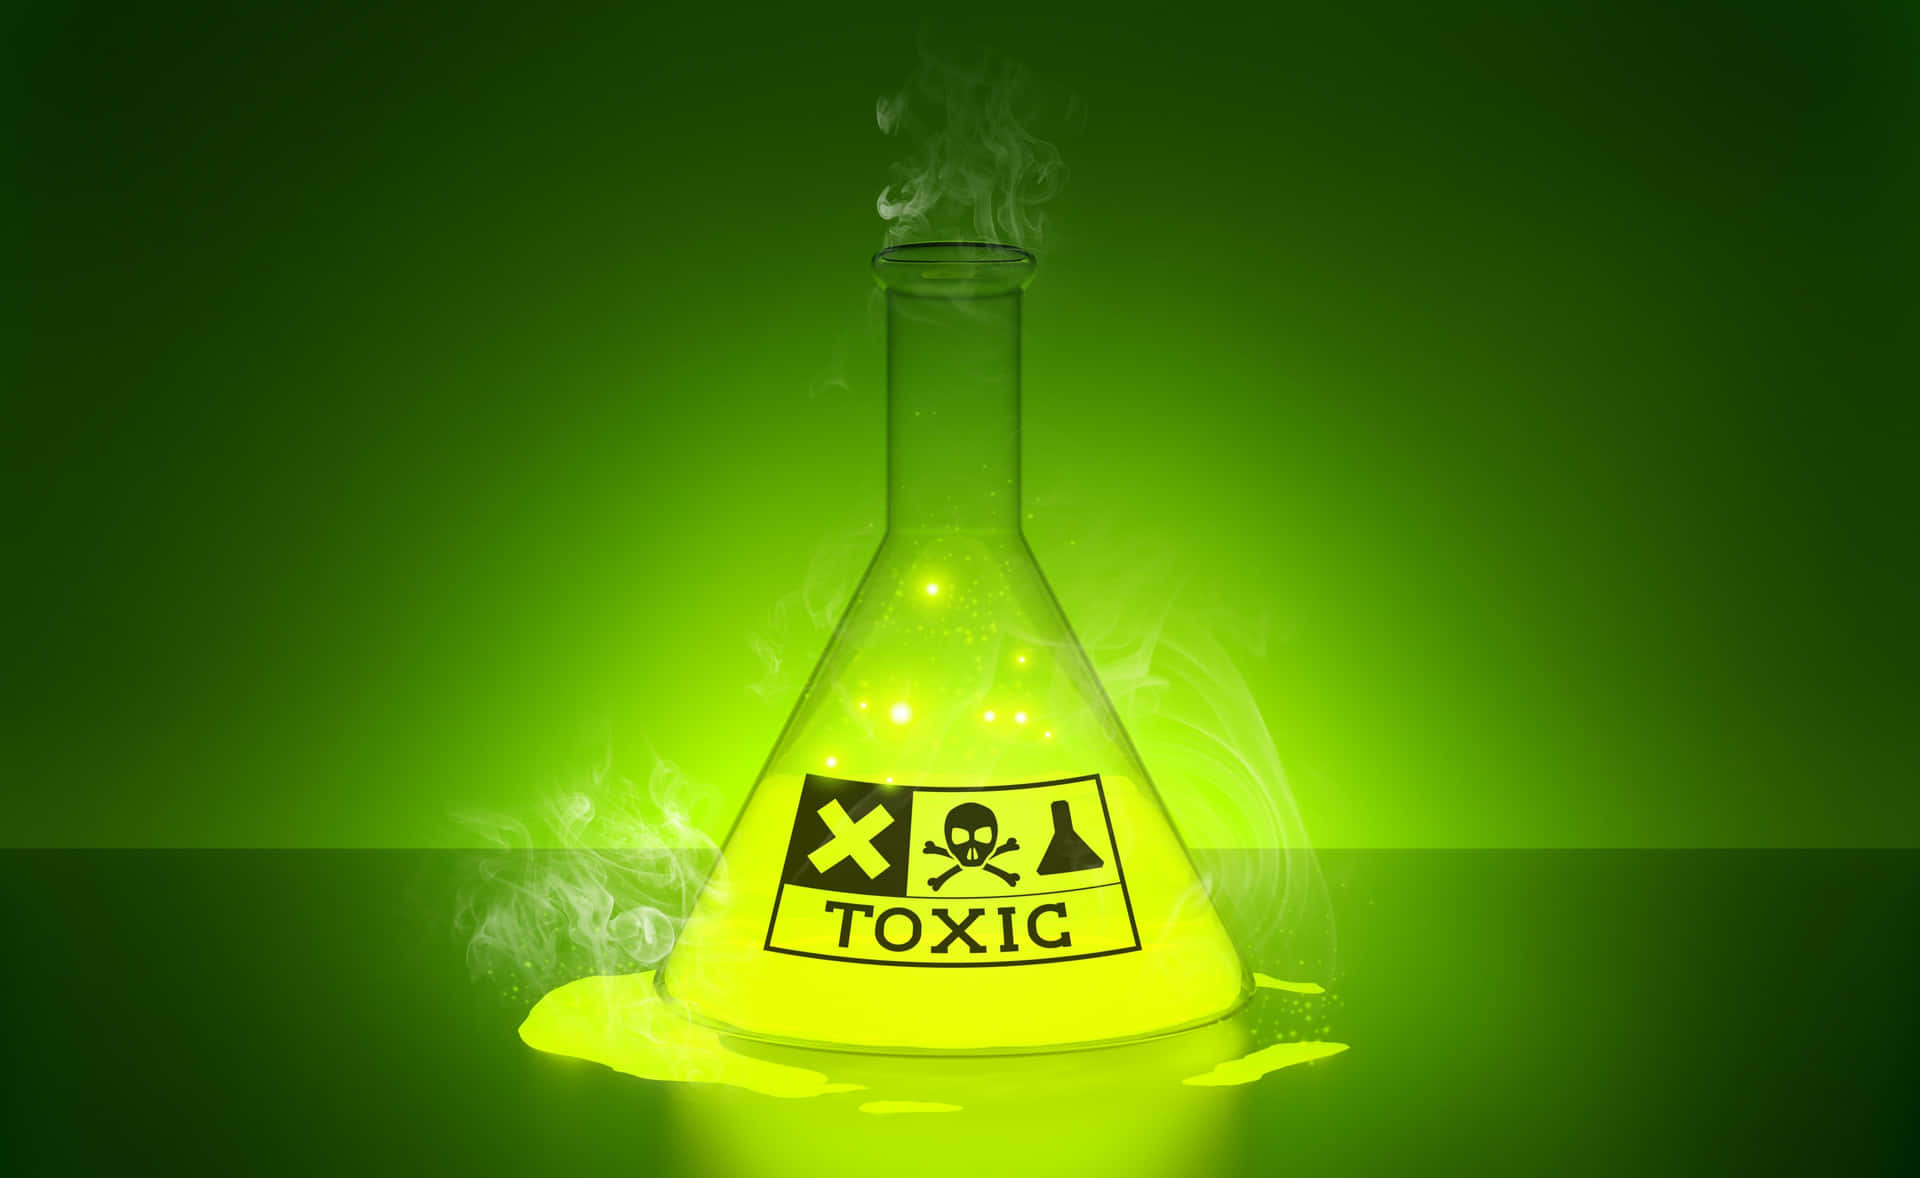 Download Toxic wallpapers for mobile phone free Toxic HD pictures